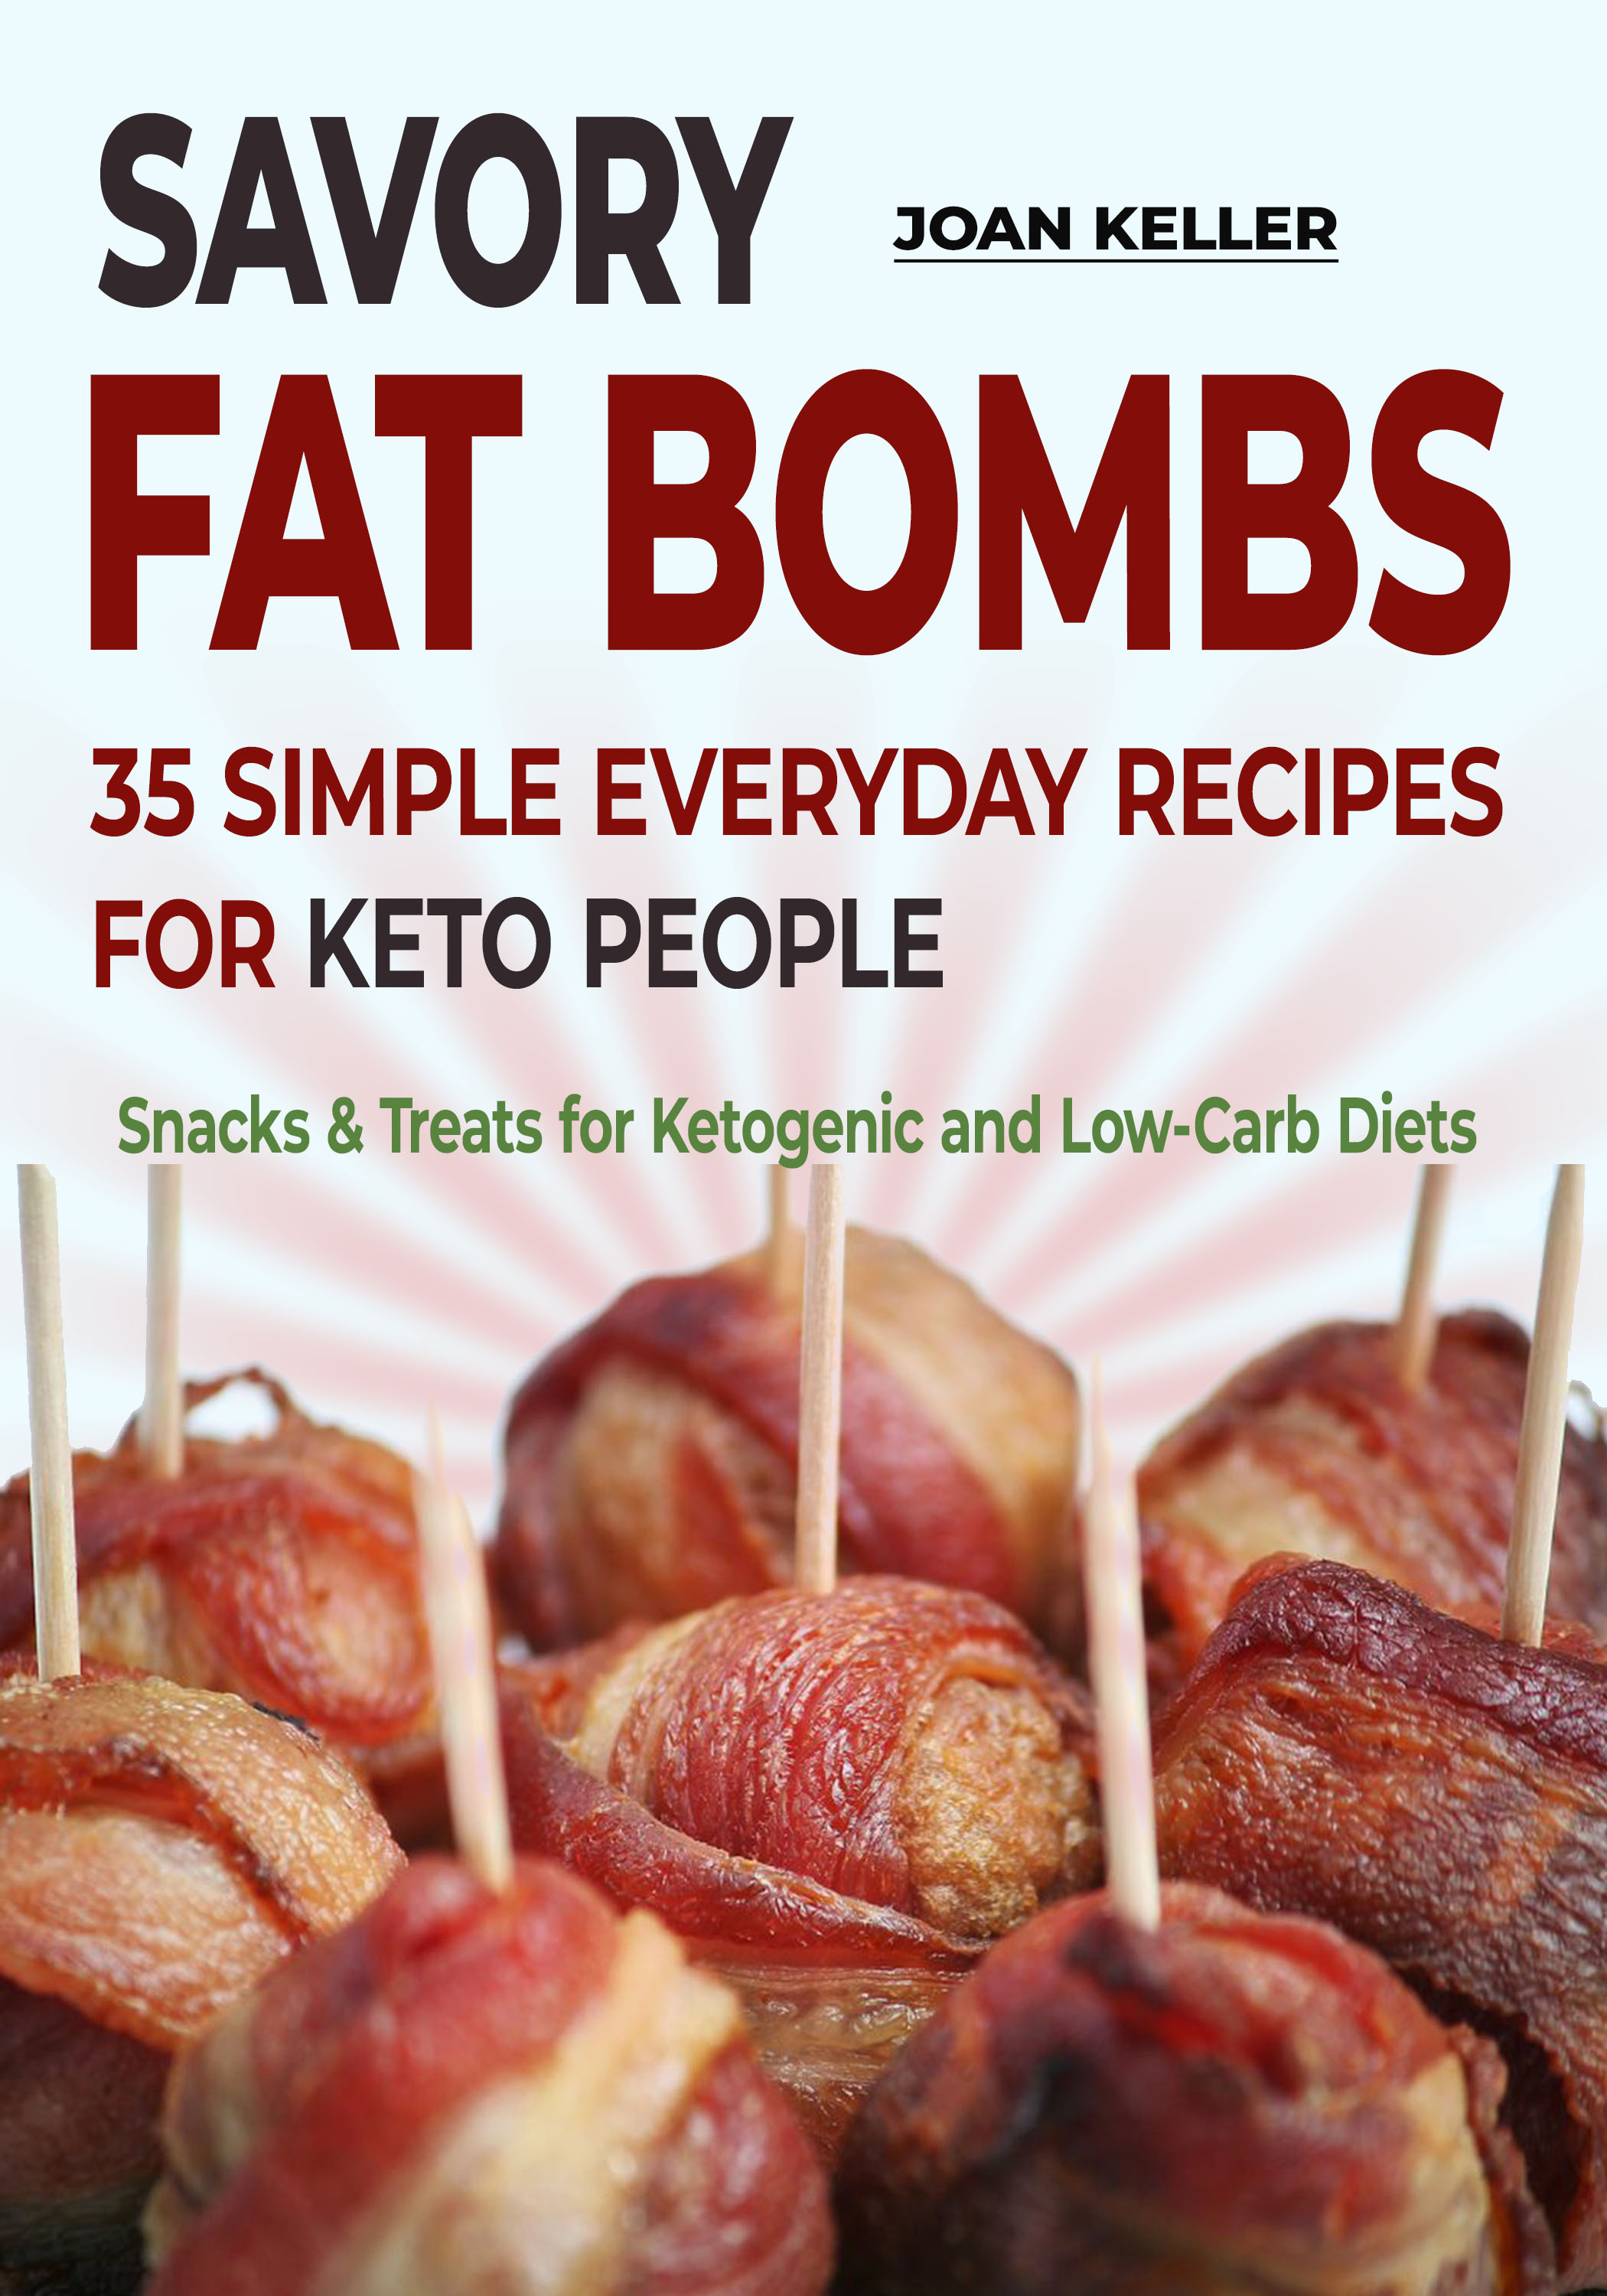 FREE: Savory Fat Bombs: 35 Simple Everyday Recipes for Keto People (Snacks & Treats for Ketogenic and Low-Carb Diets) by Joan Keller